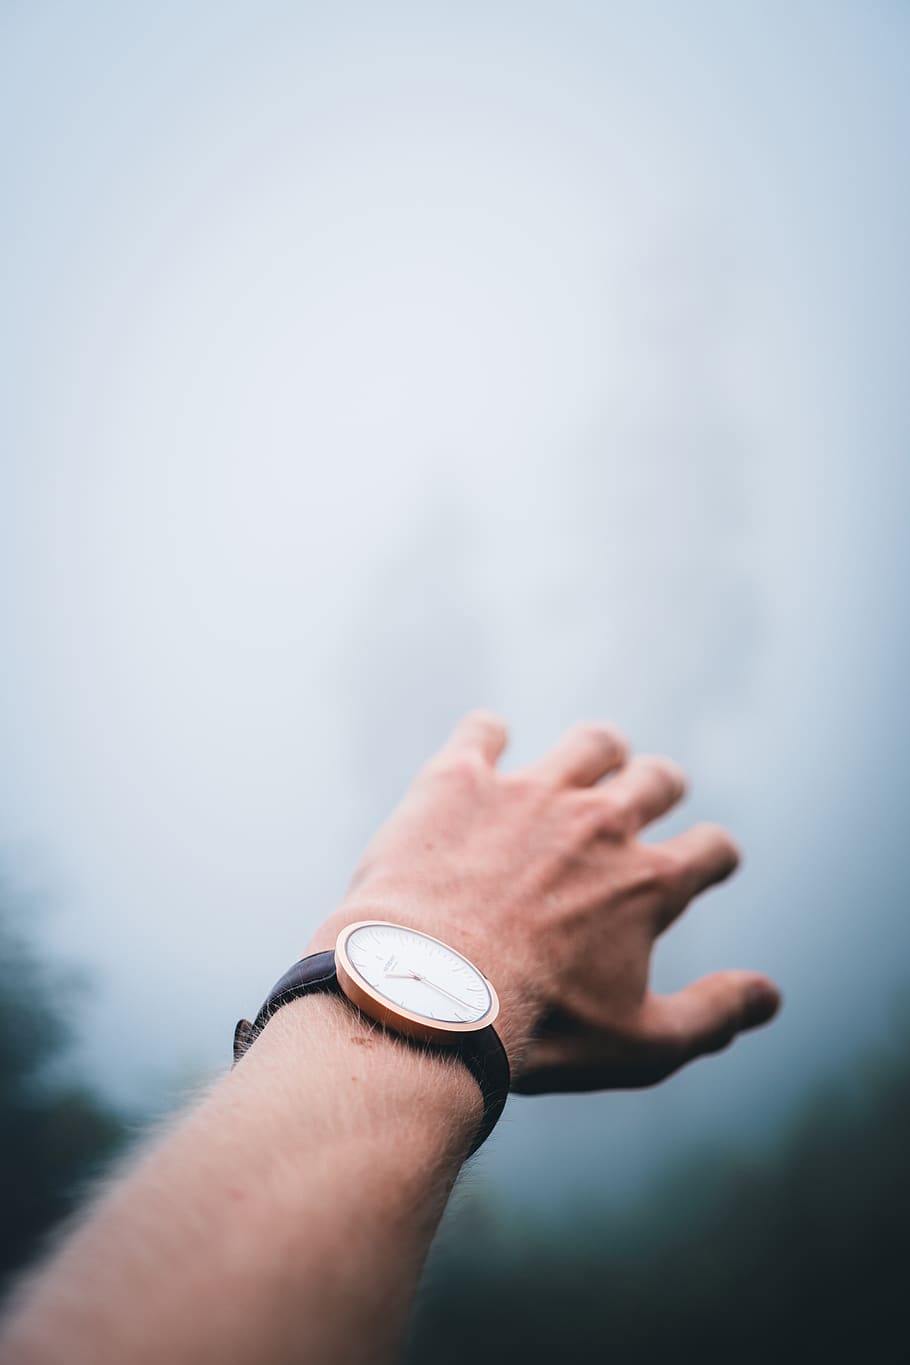 fog, clock, north green, hiking, outdoor, dom, time, mystical, clock face, movement